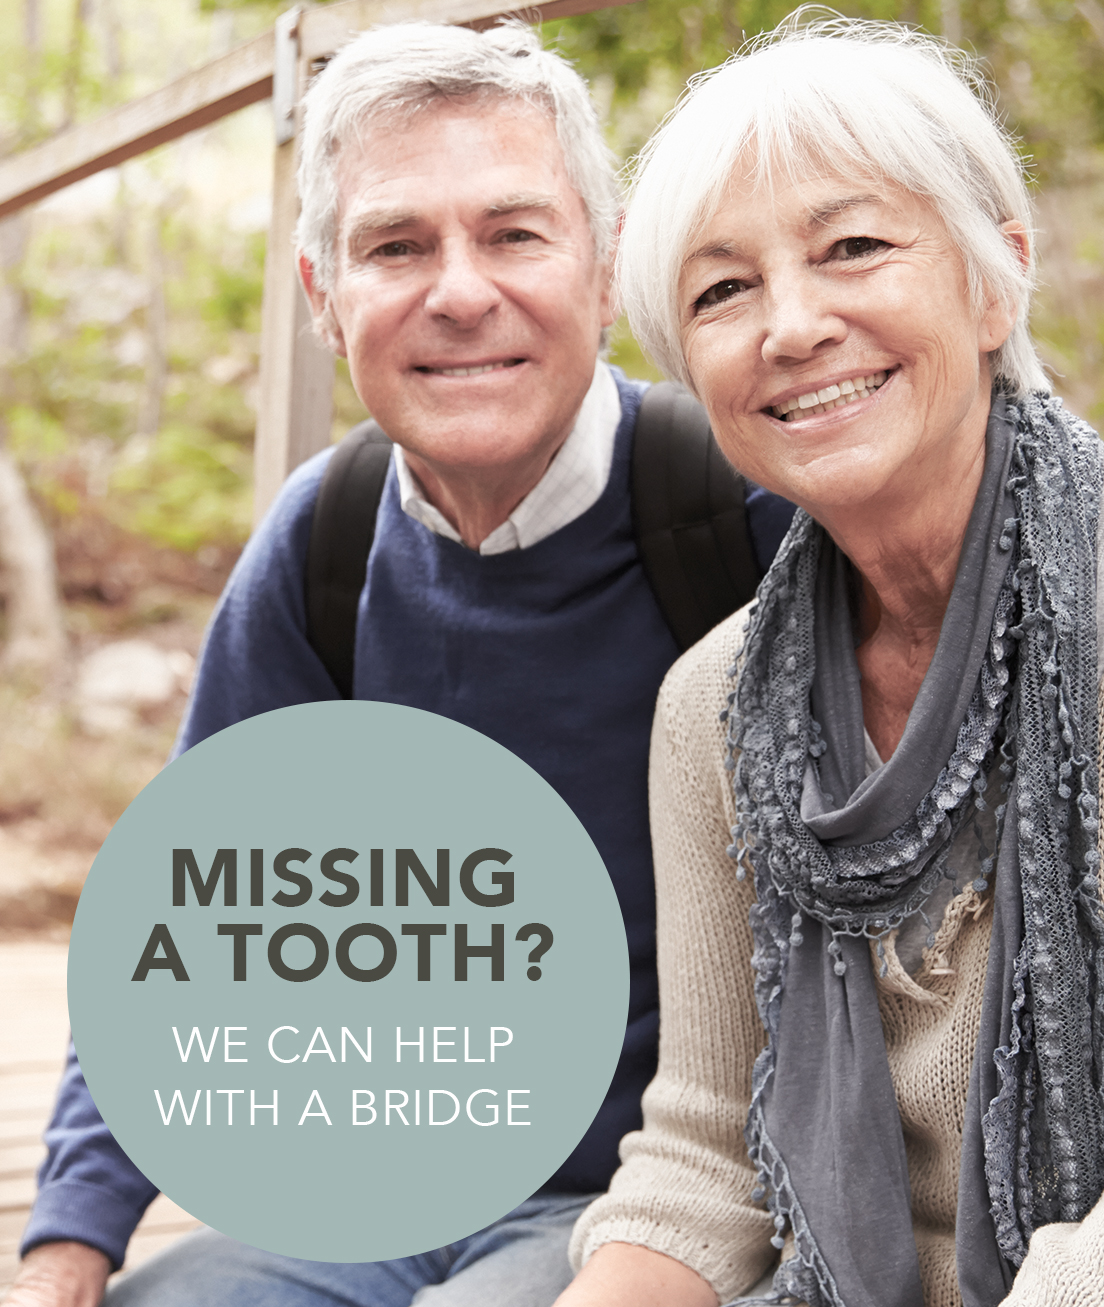 missing a tooth? we can help with a bridge